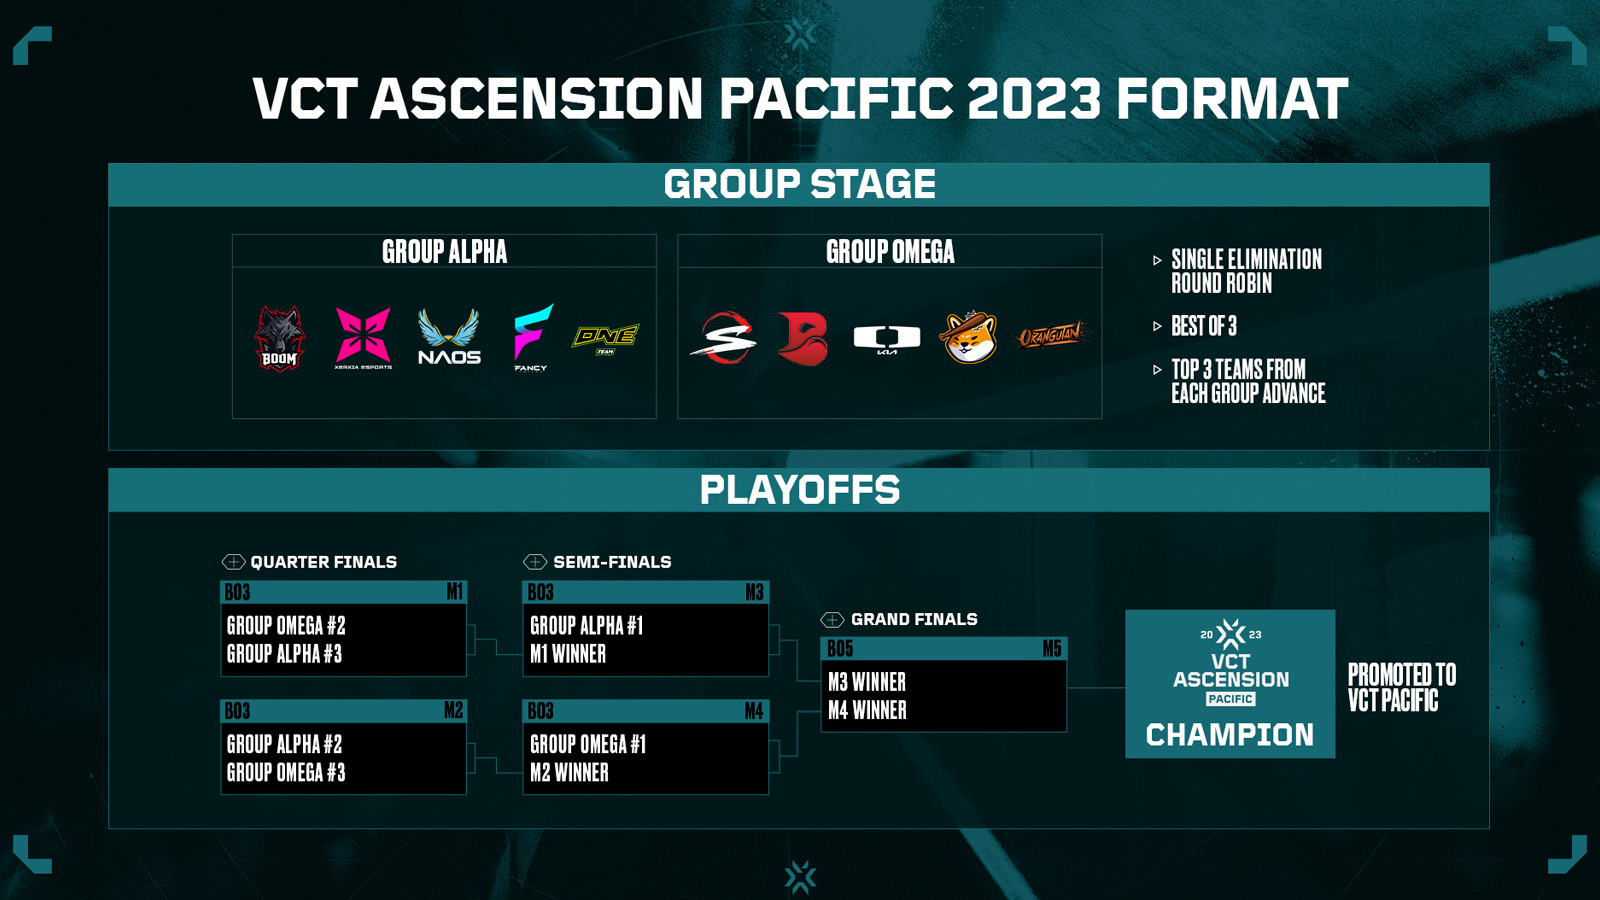 VCT Ascension Pacific 2023 Schedule, results, standings, format, teams